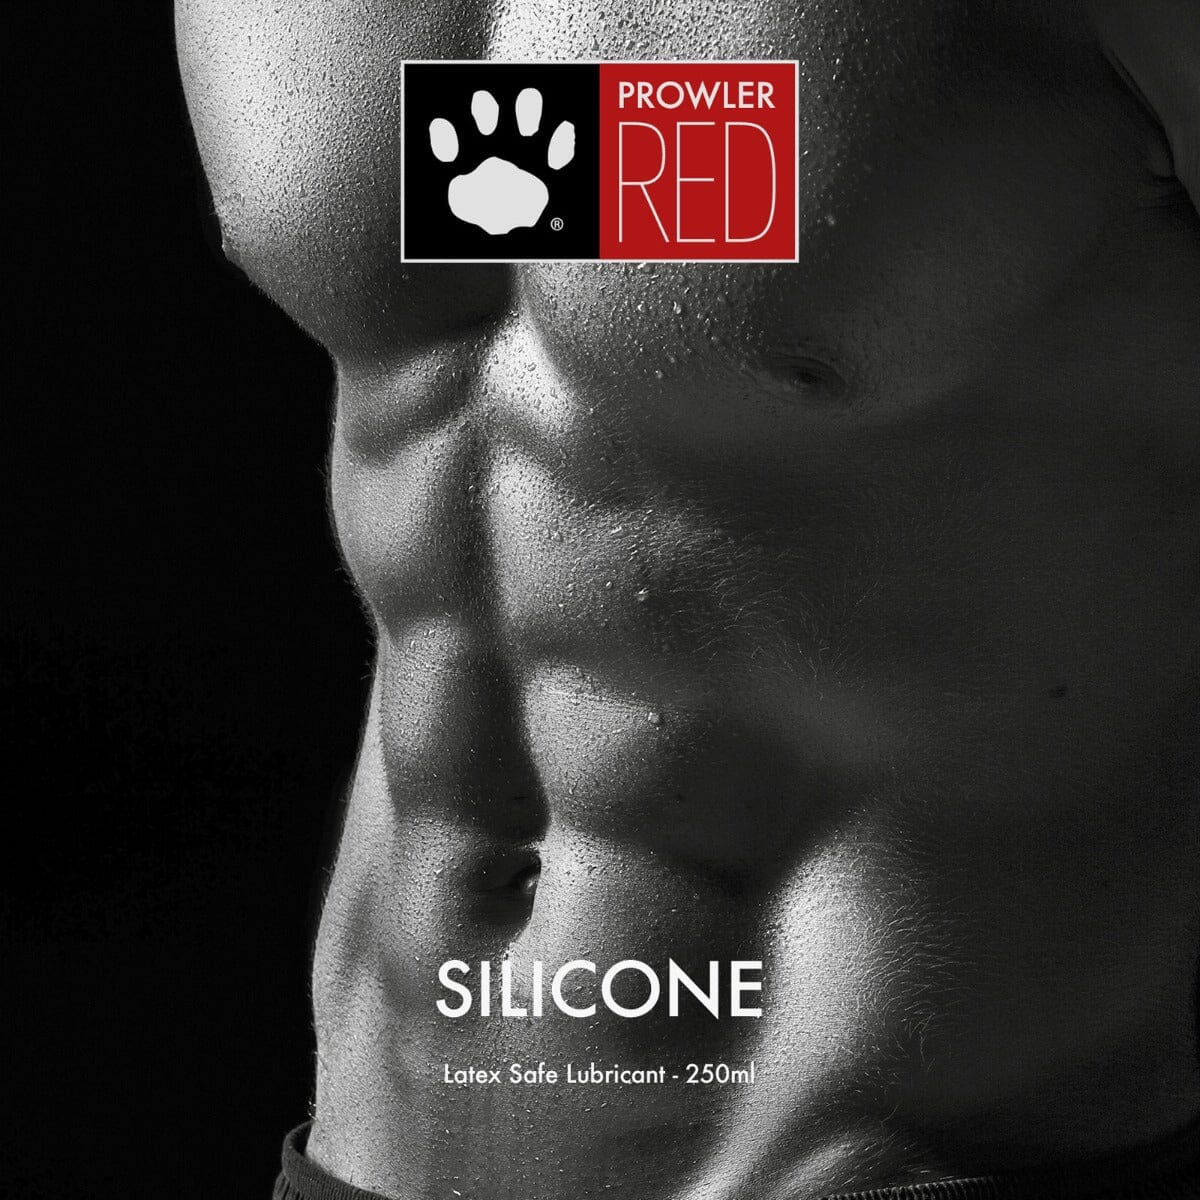 Prowler RED Silicone Lube